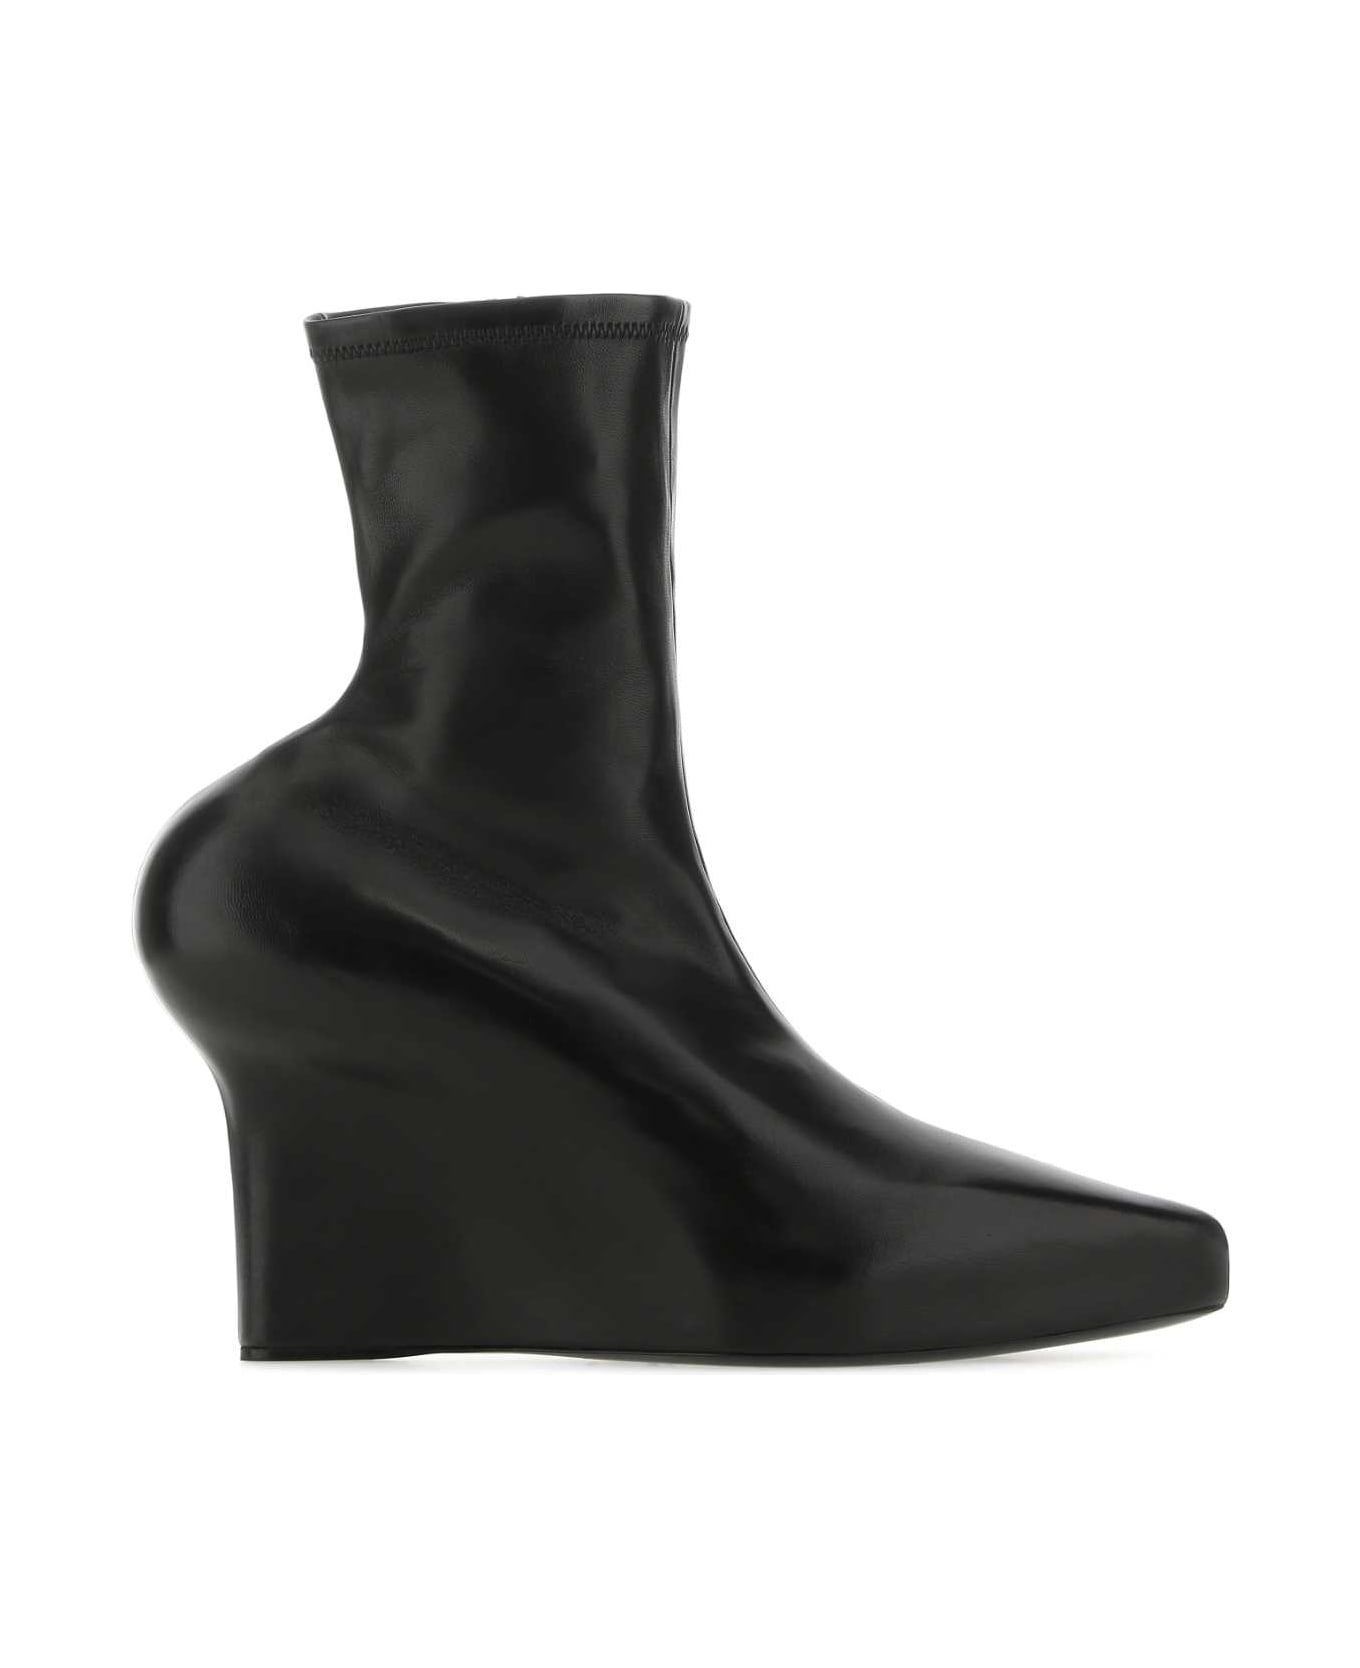 Givenchy Black Nappa Leather Ankle Boots - 001